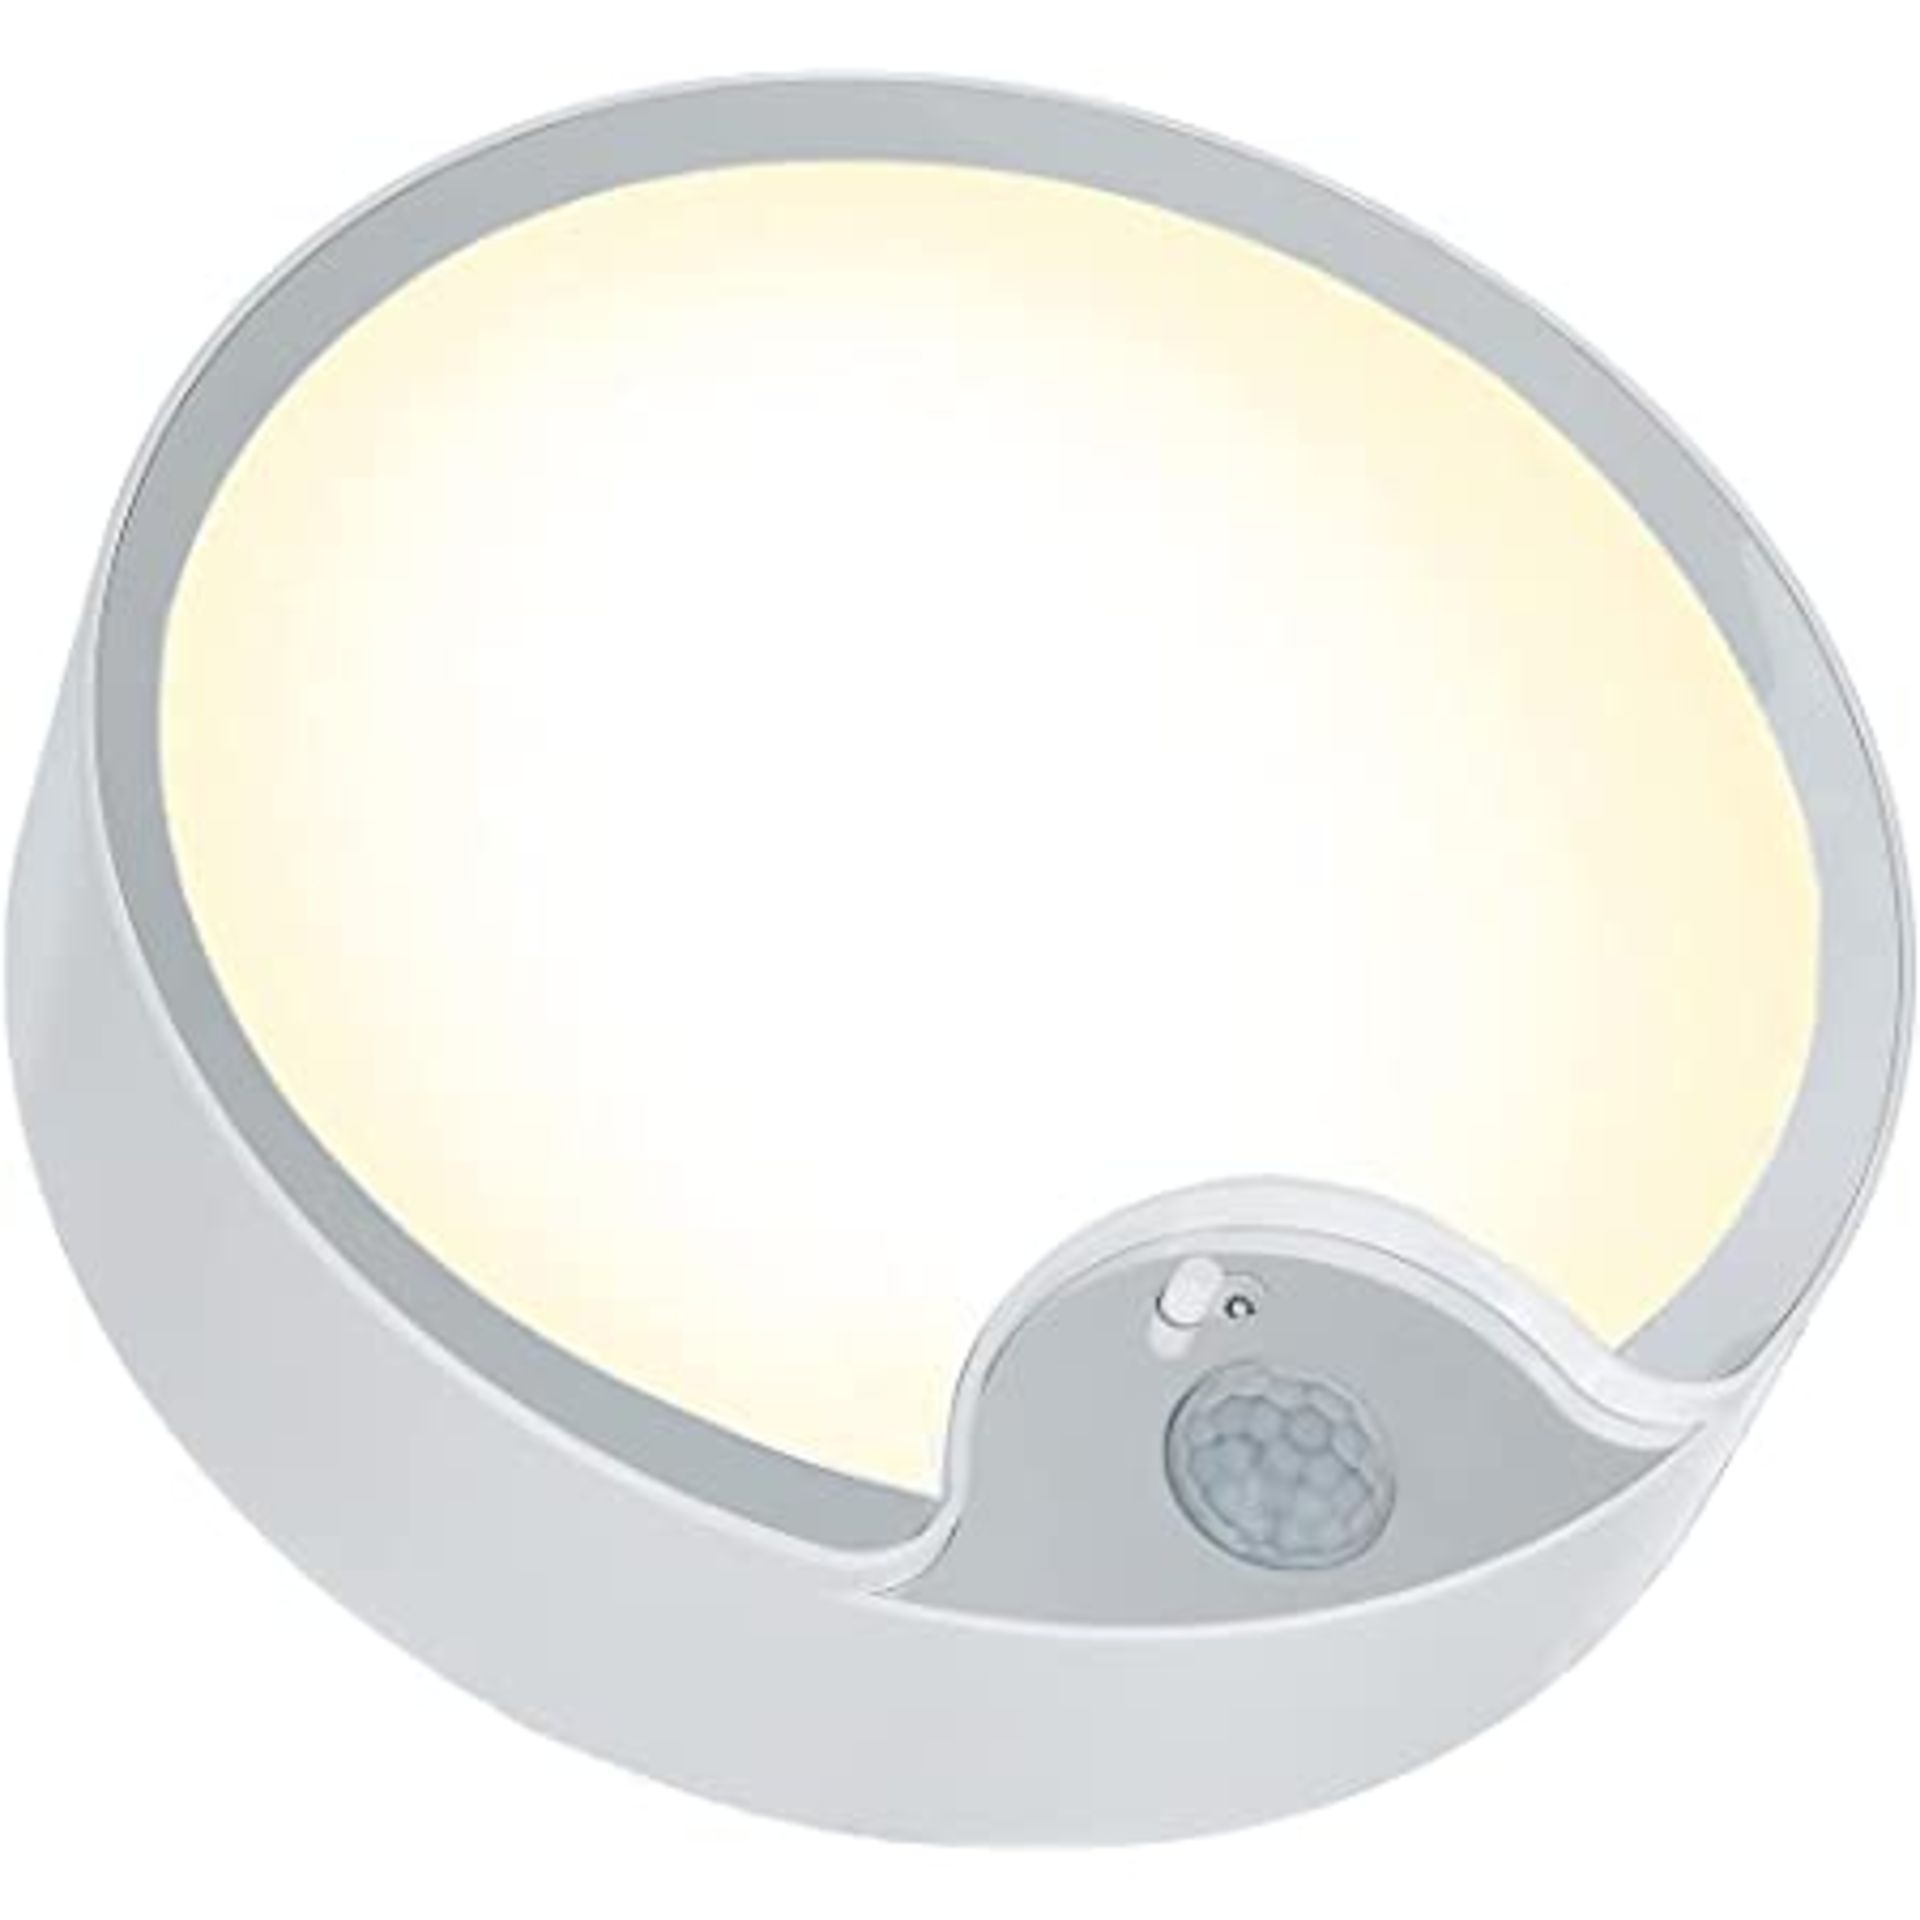 Motion Sensor Ceiling Light Battery Operated Ultra Bright Motion Activated Indoor Light for Stairway